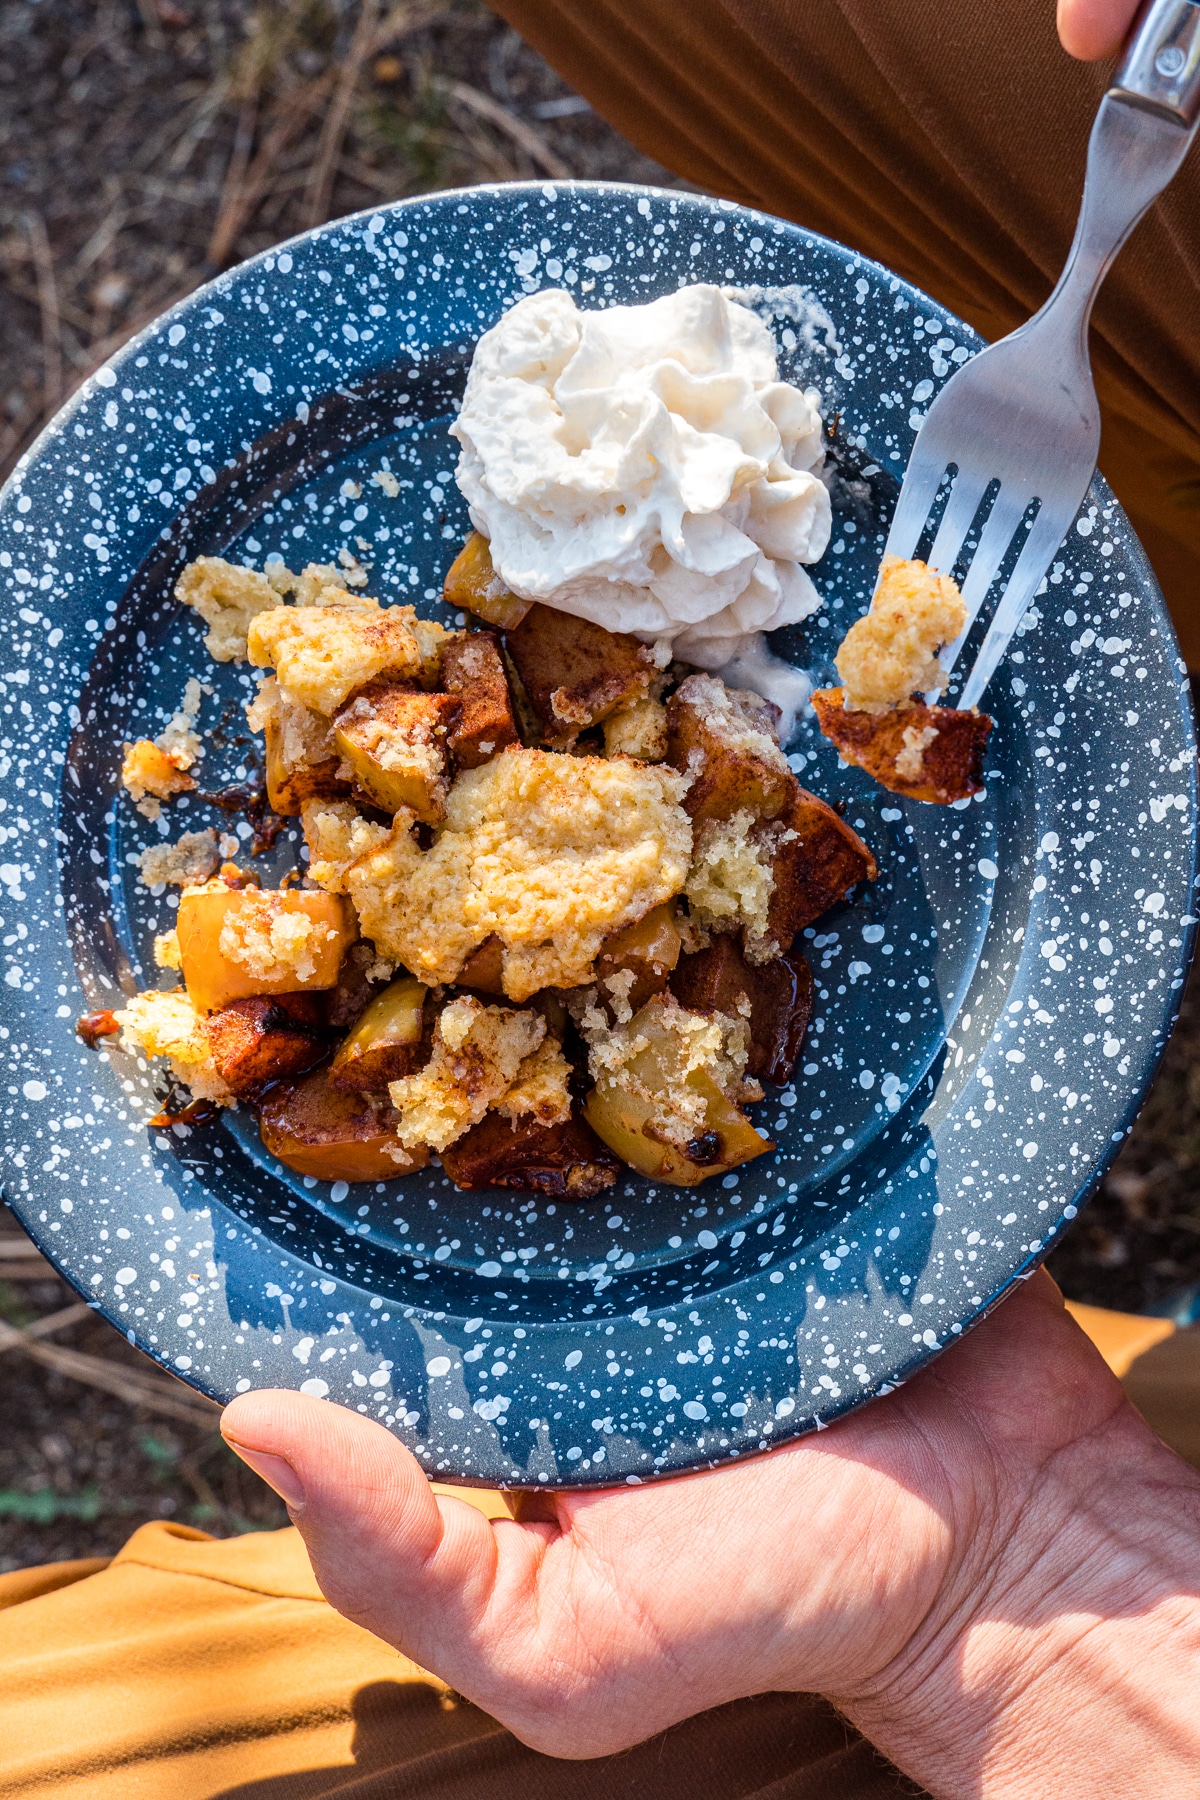 Apple cobbler on a blue plate with whipped cream